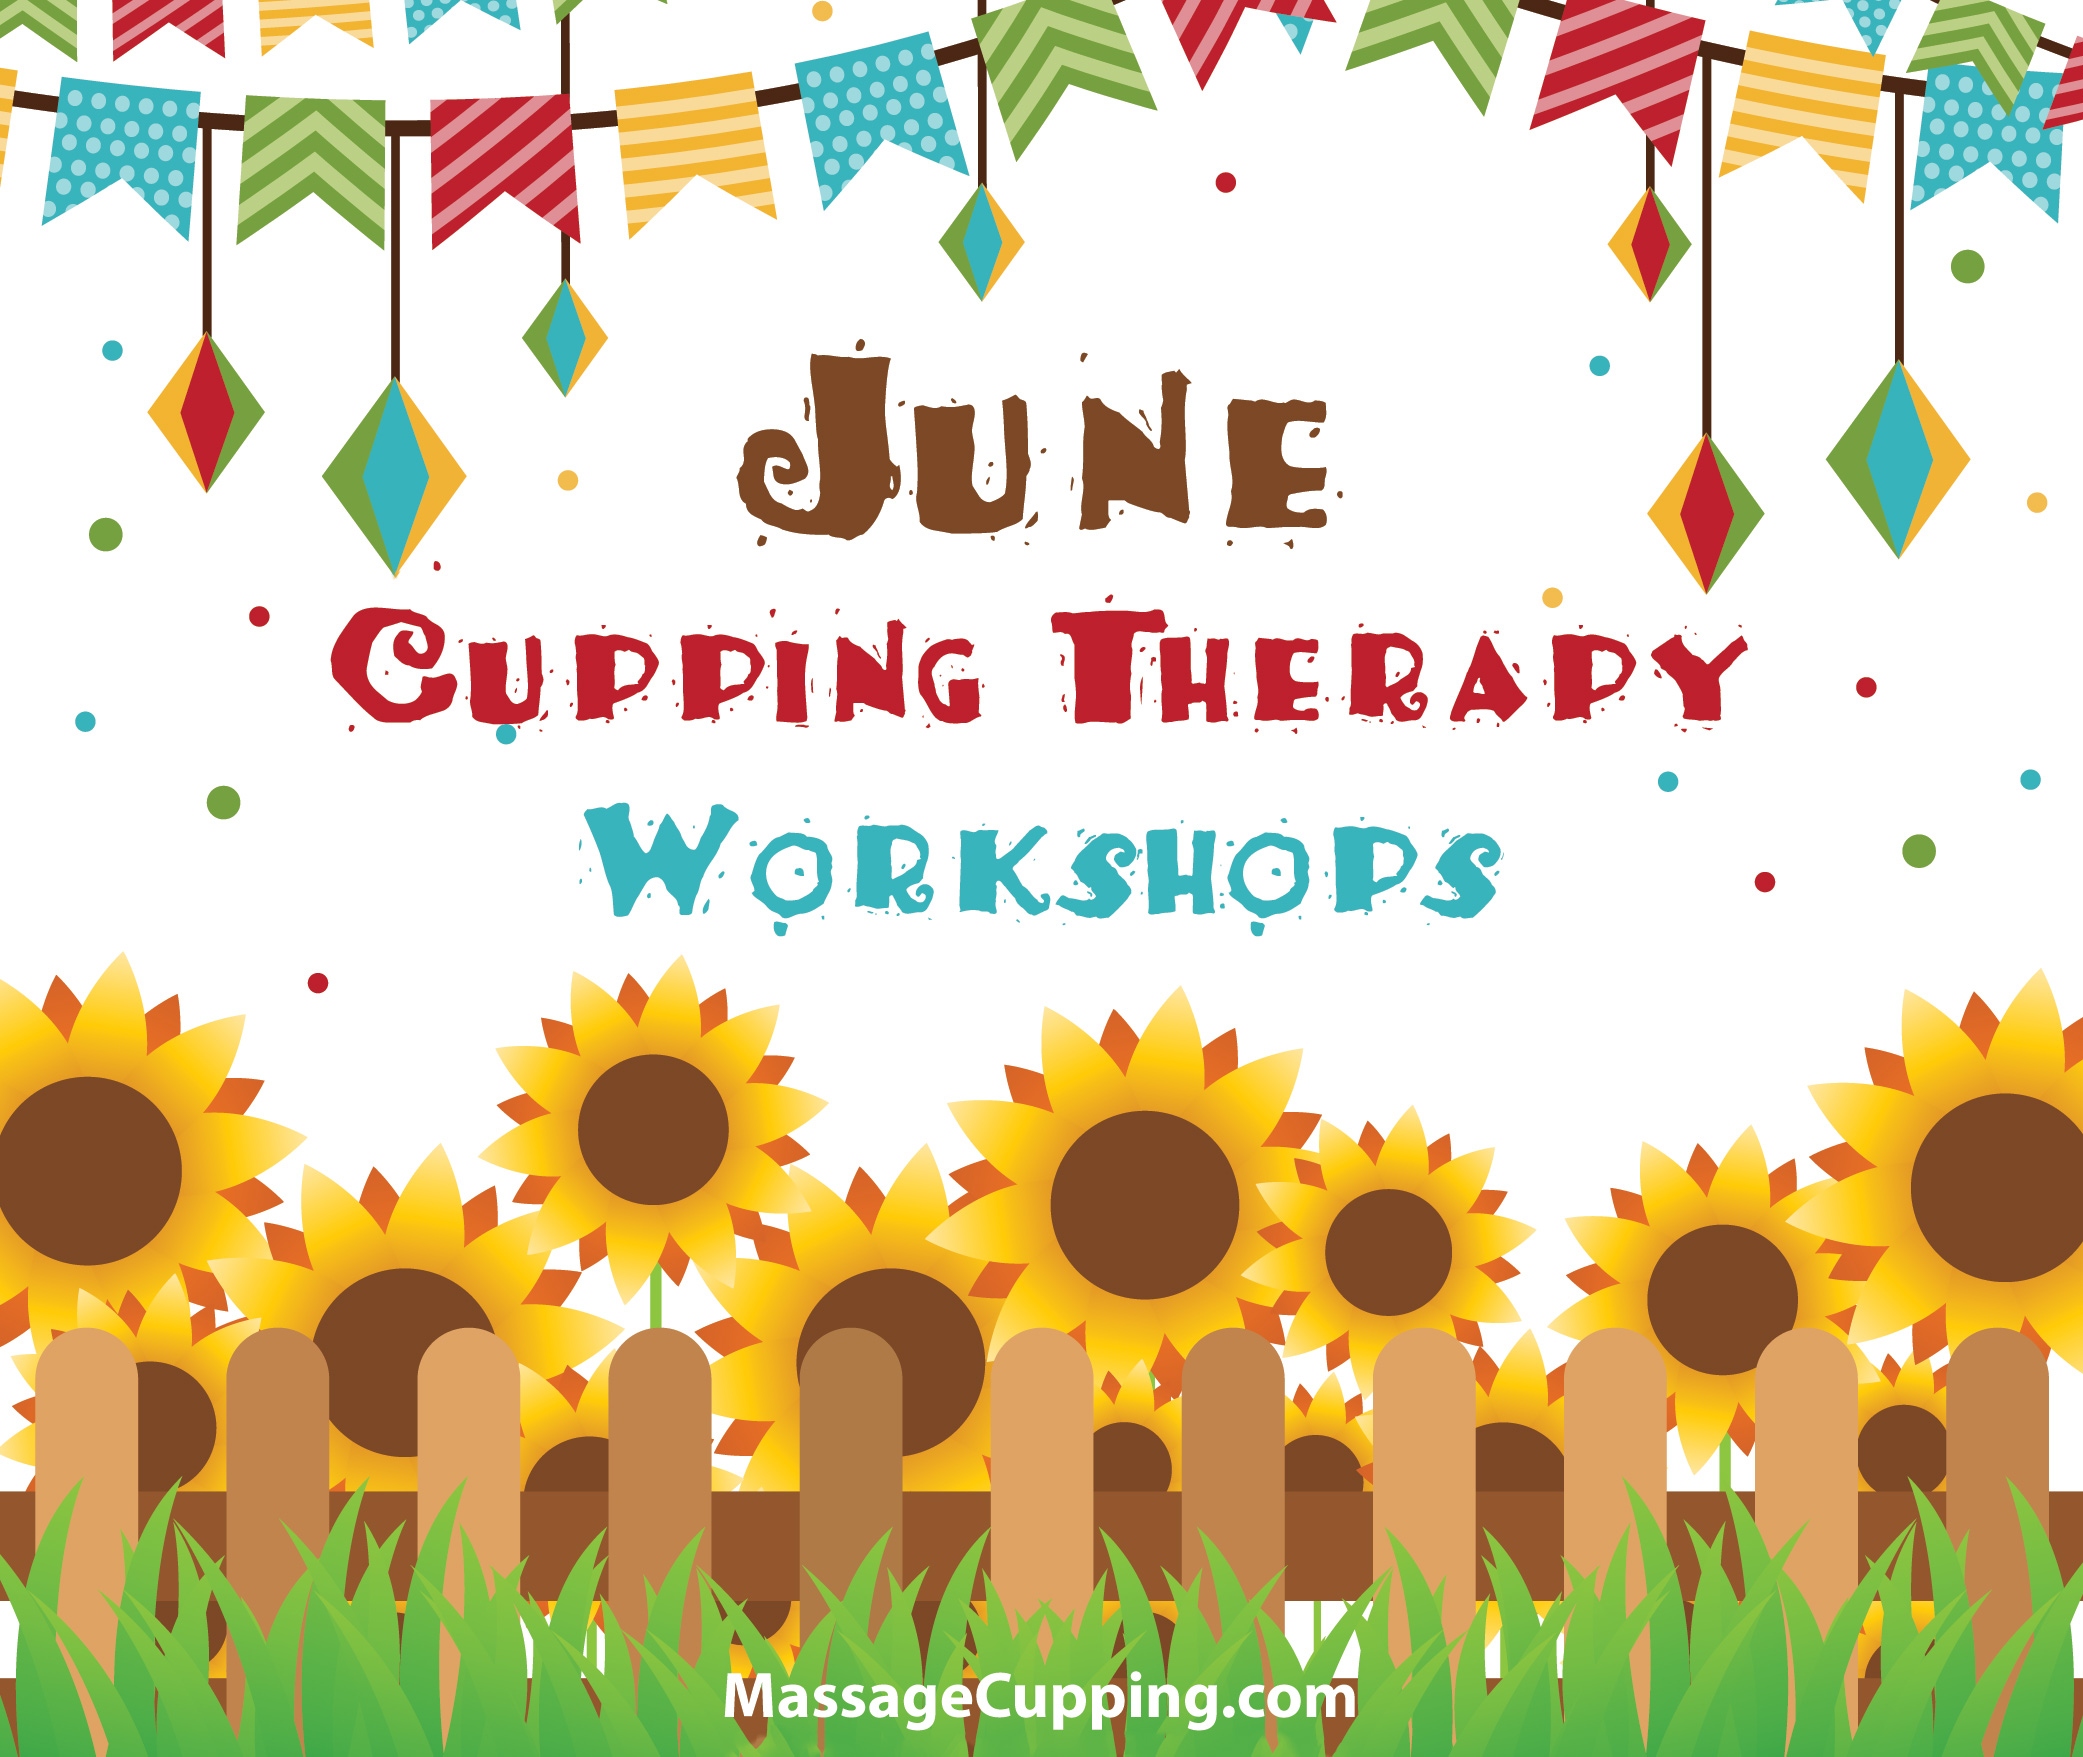 June 2019 Cupping Therapy Workshops